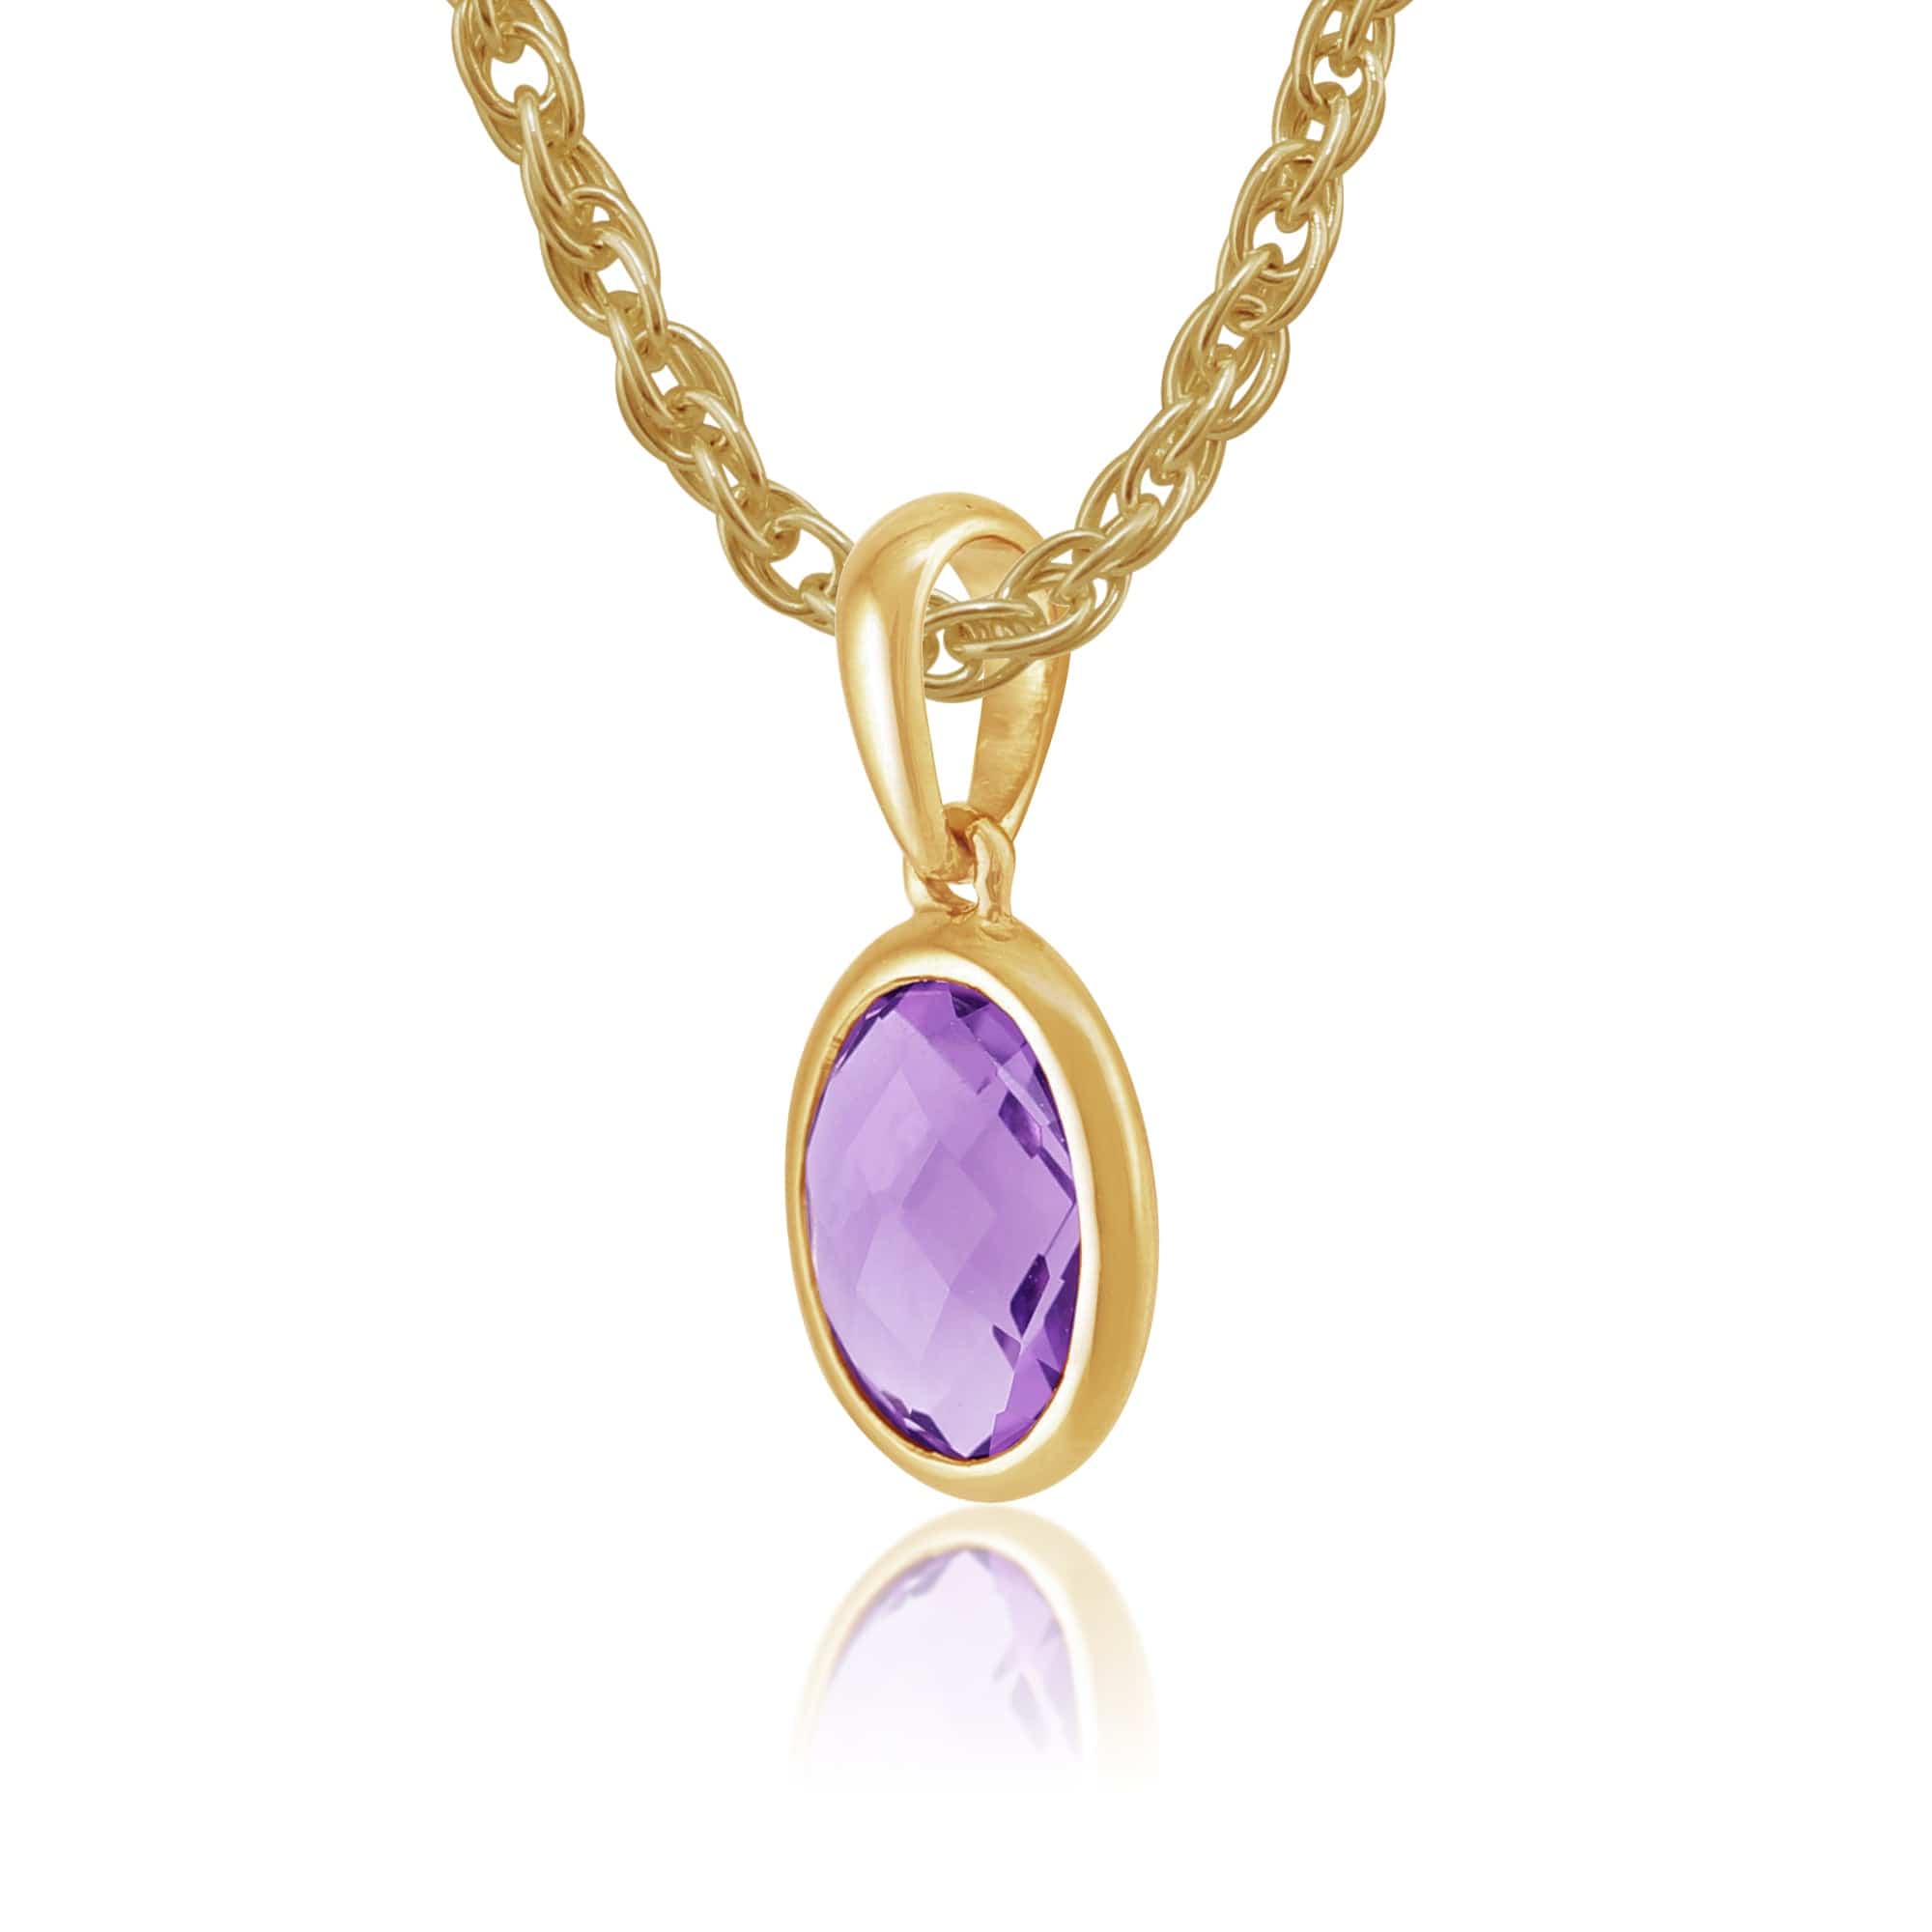 22518 Classic Oval Amethyst Pendant in 9ct Yellow Gold 2